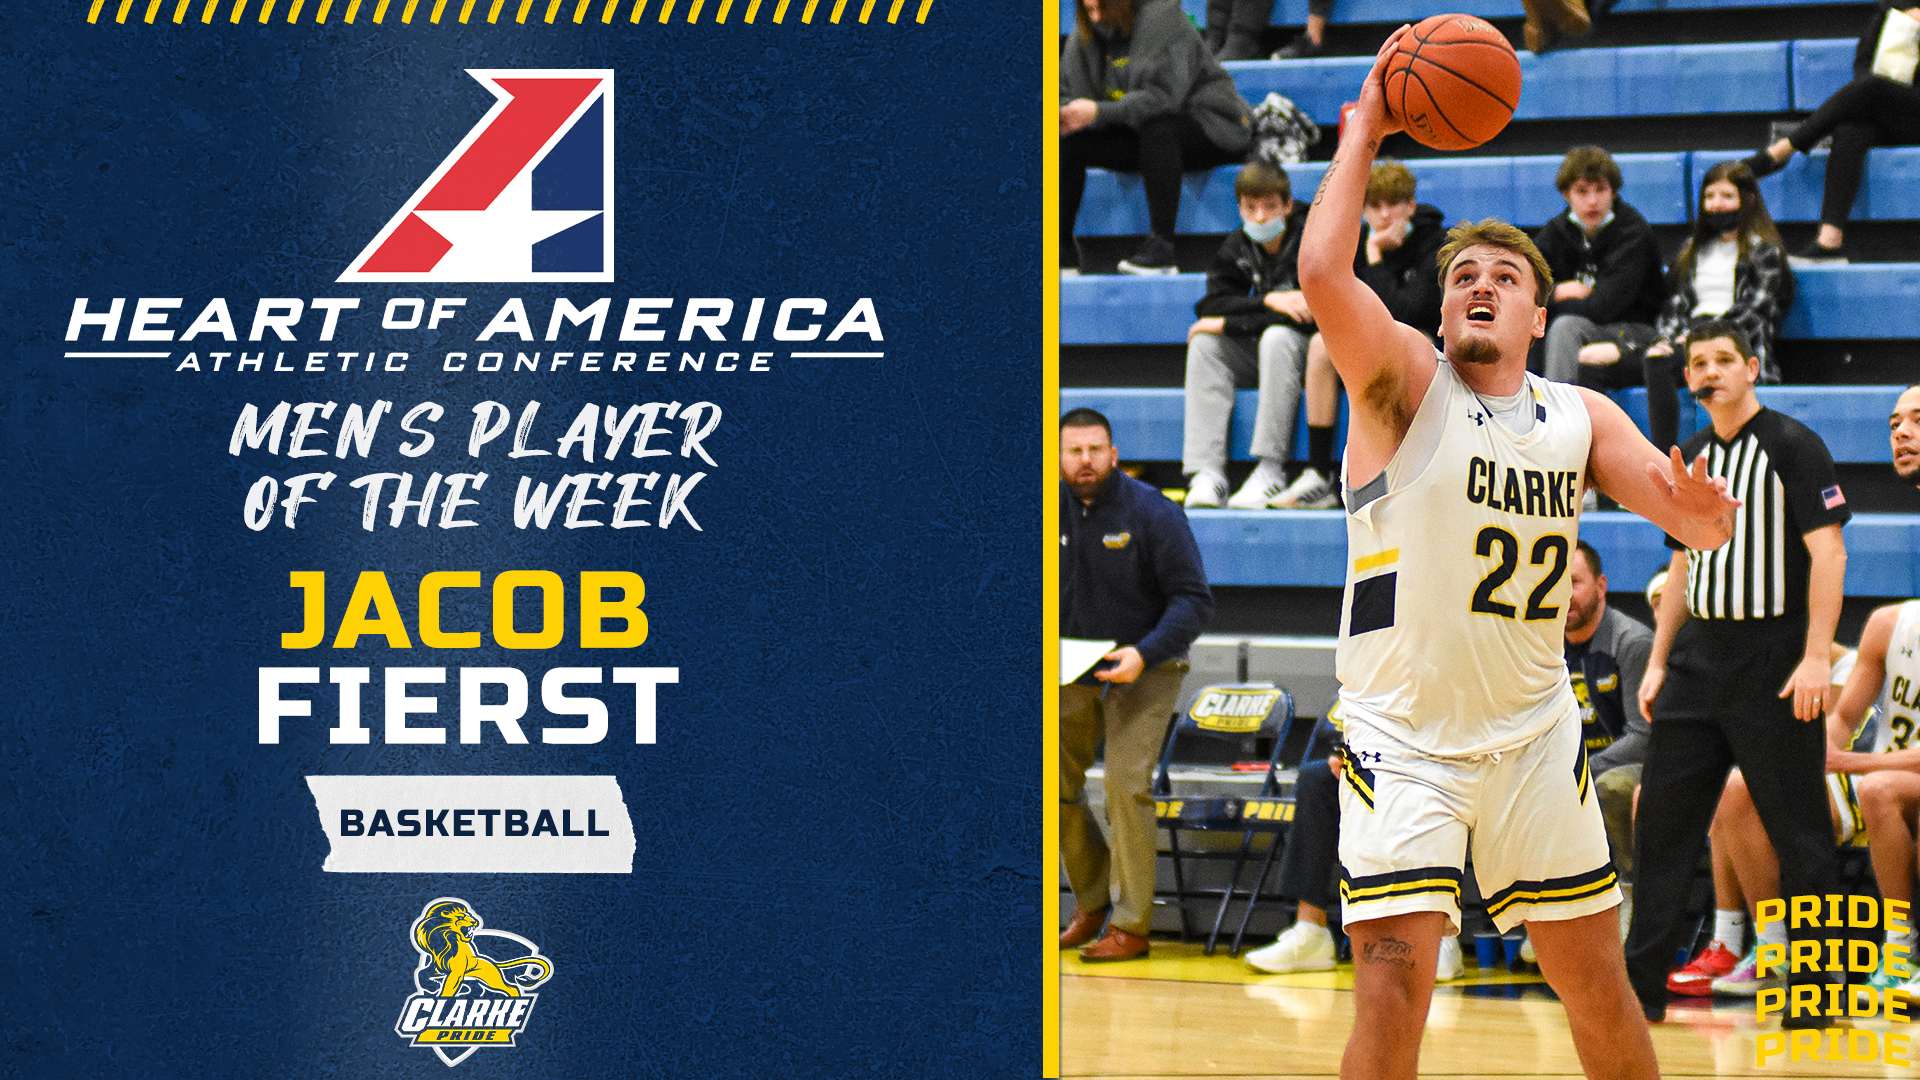 Heart of America Athletic Conference
Men's Player of the Week
Jacob Fierst
Basketball